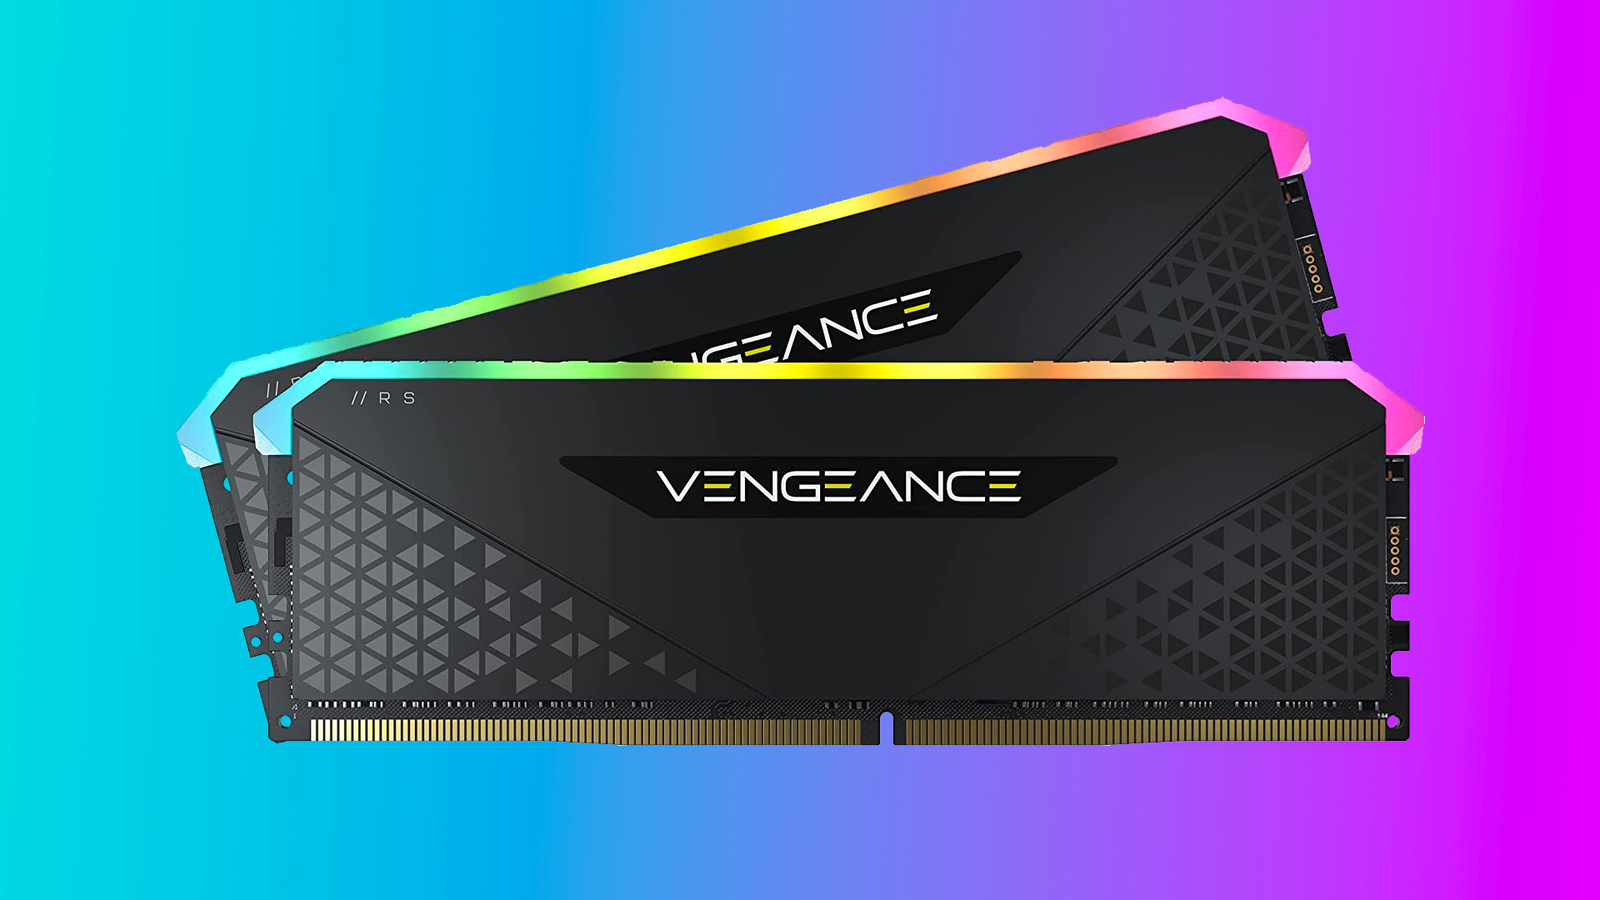 Vengeance RGB RAM RS solid 32GB for Corsair £79 from Amazon Grab DDR4 of